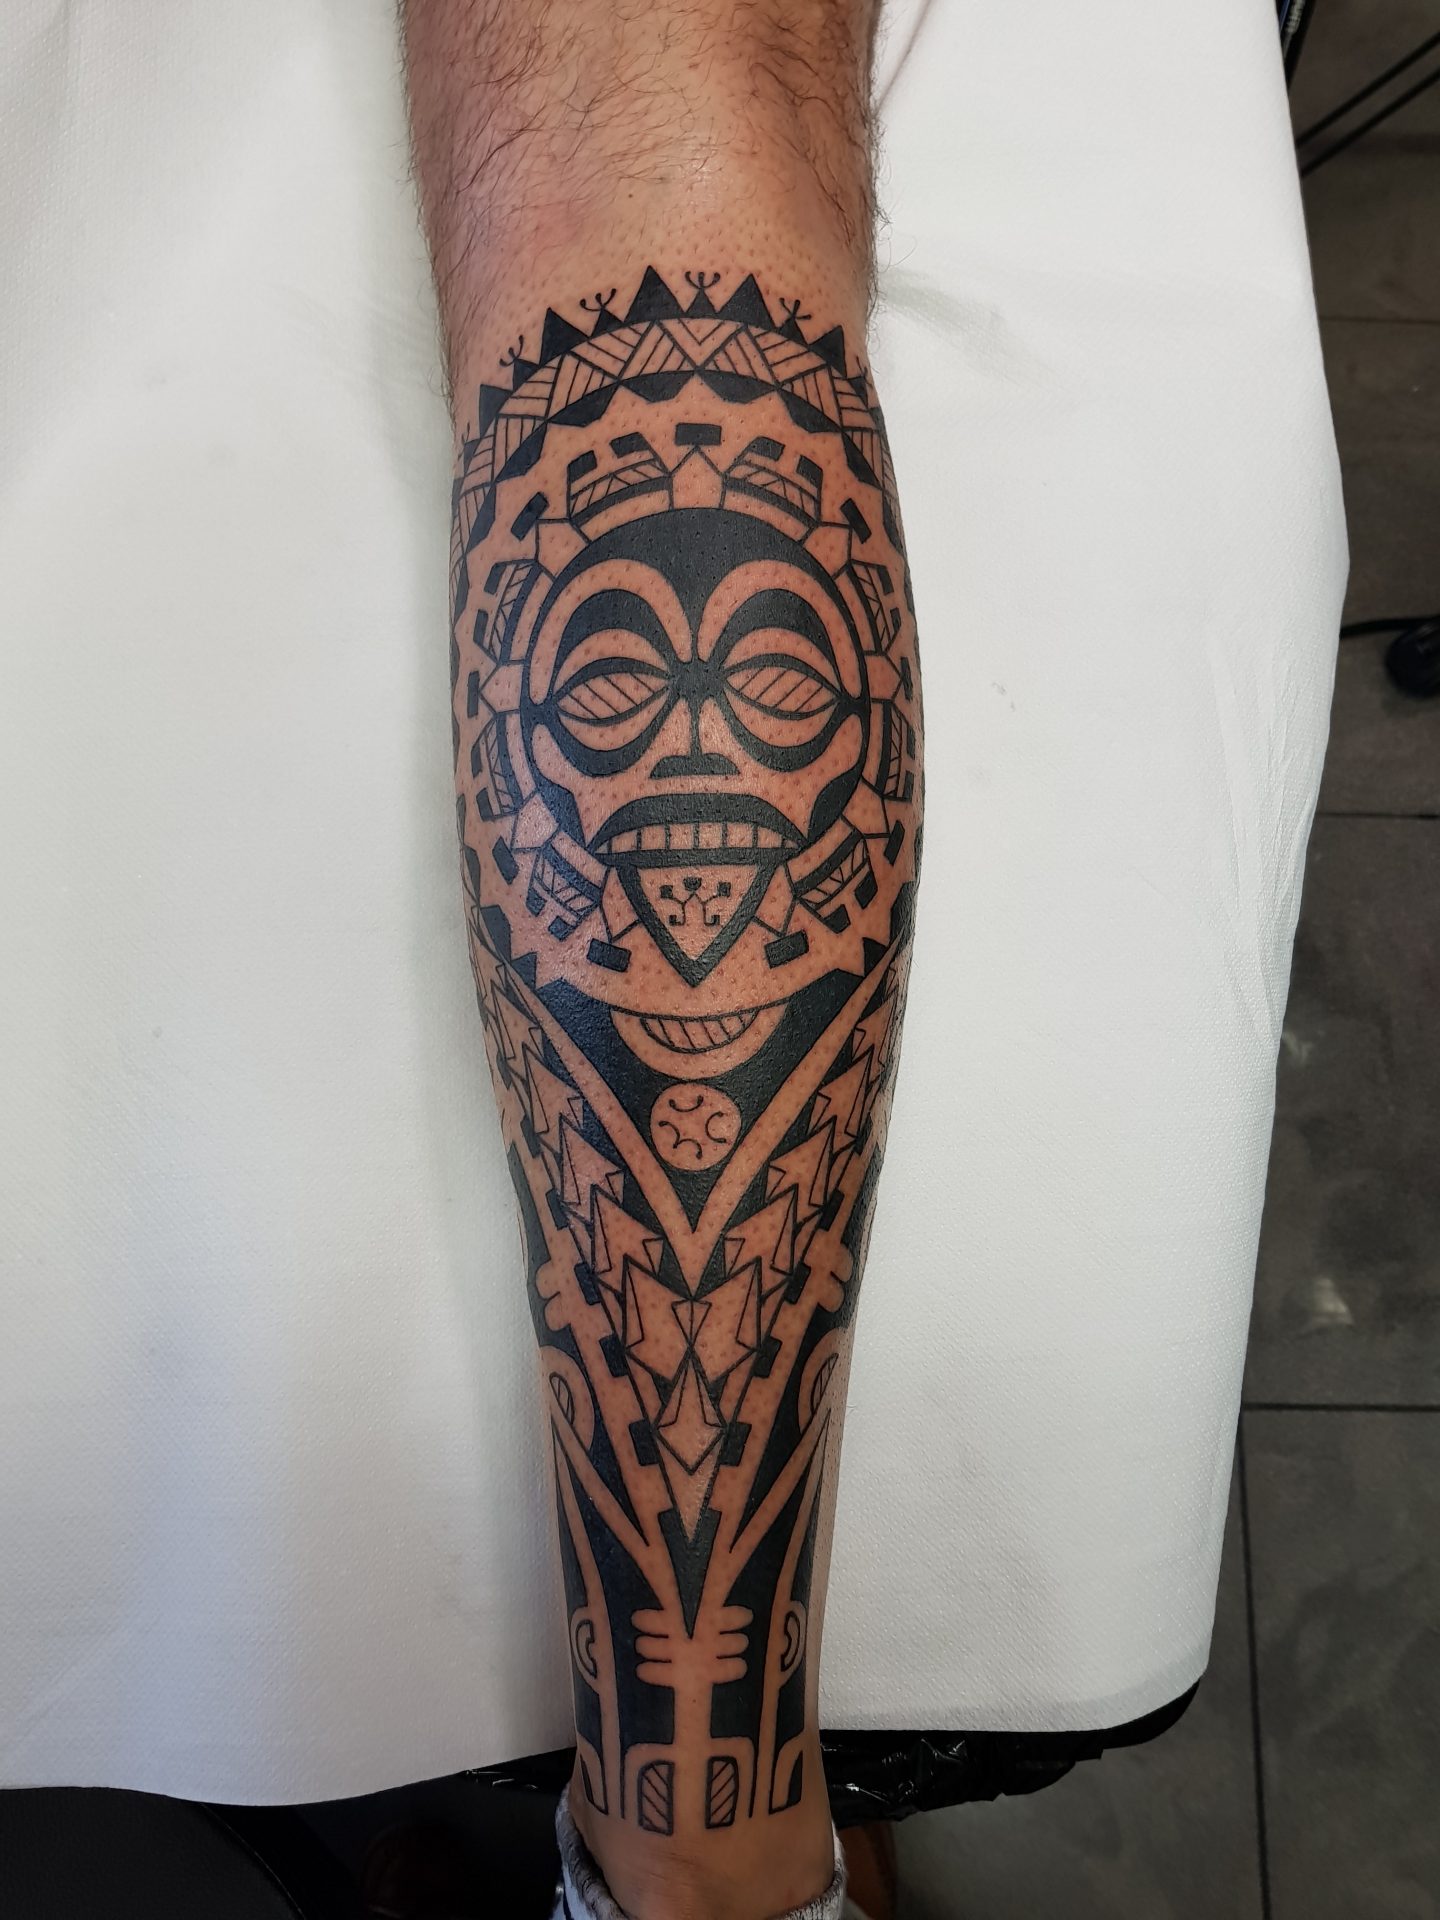 Meaning of the Tiki Tattoo | BlendUp